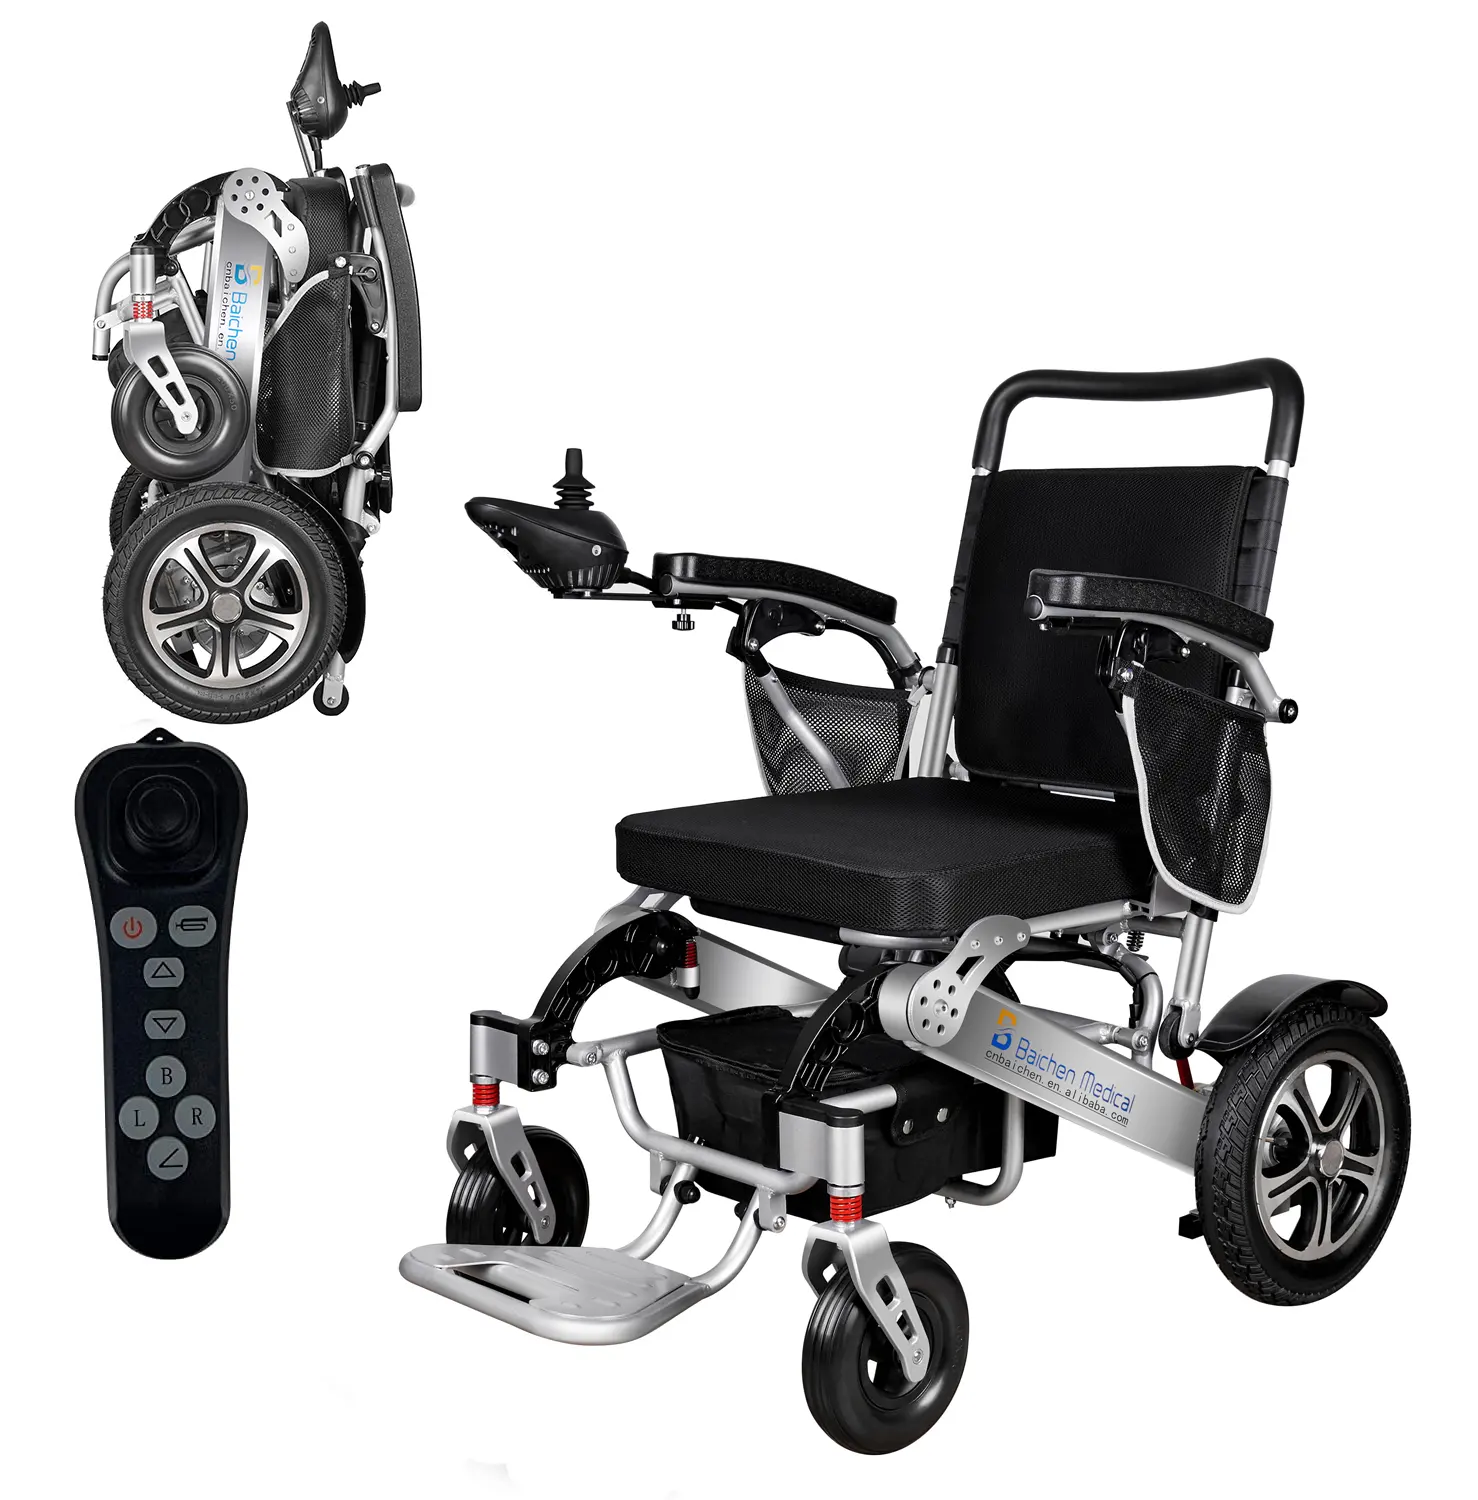 2022 Top Exposure Rate Products Folding Wheelchair Fast Durable Stable Joystick Controller For Electric Wheelchair Used